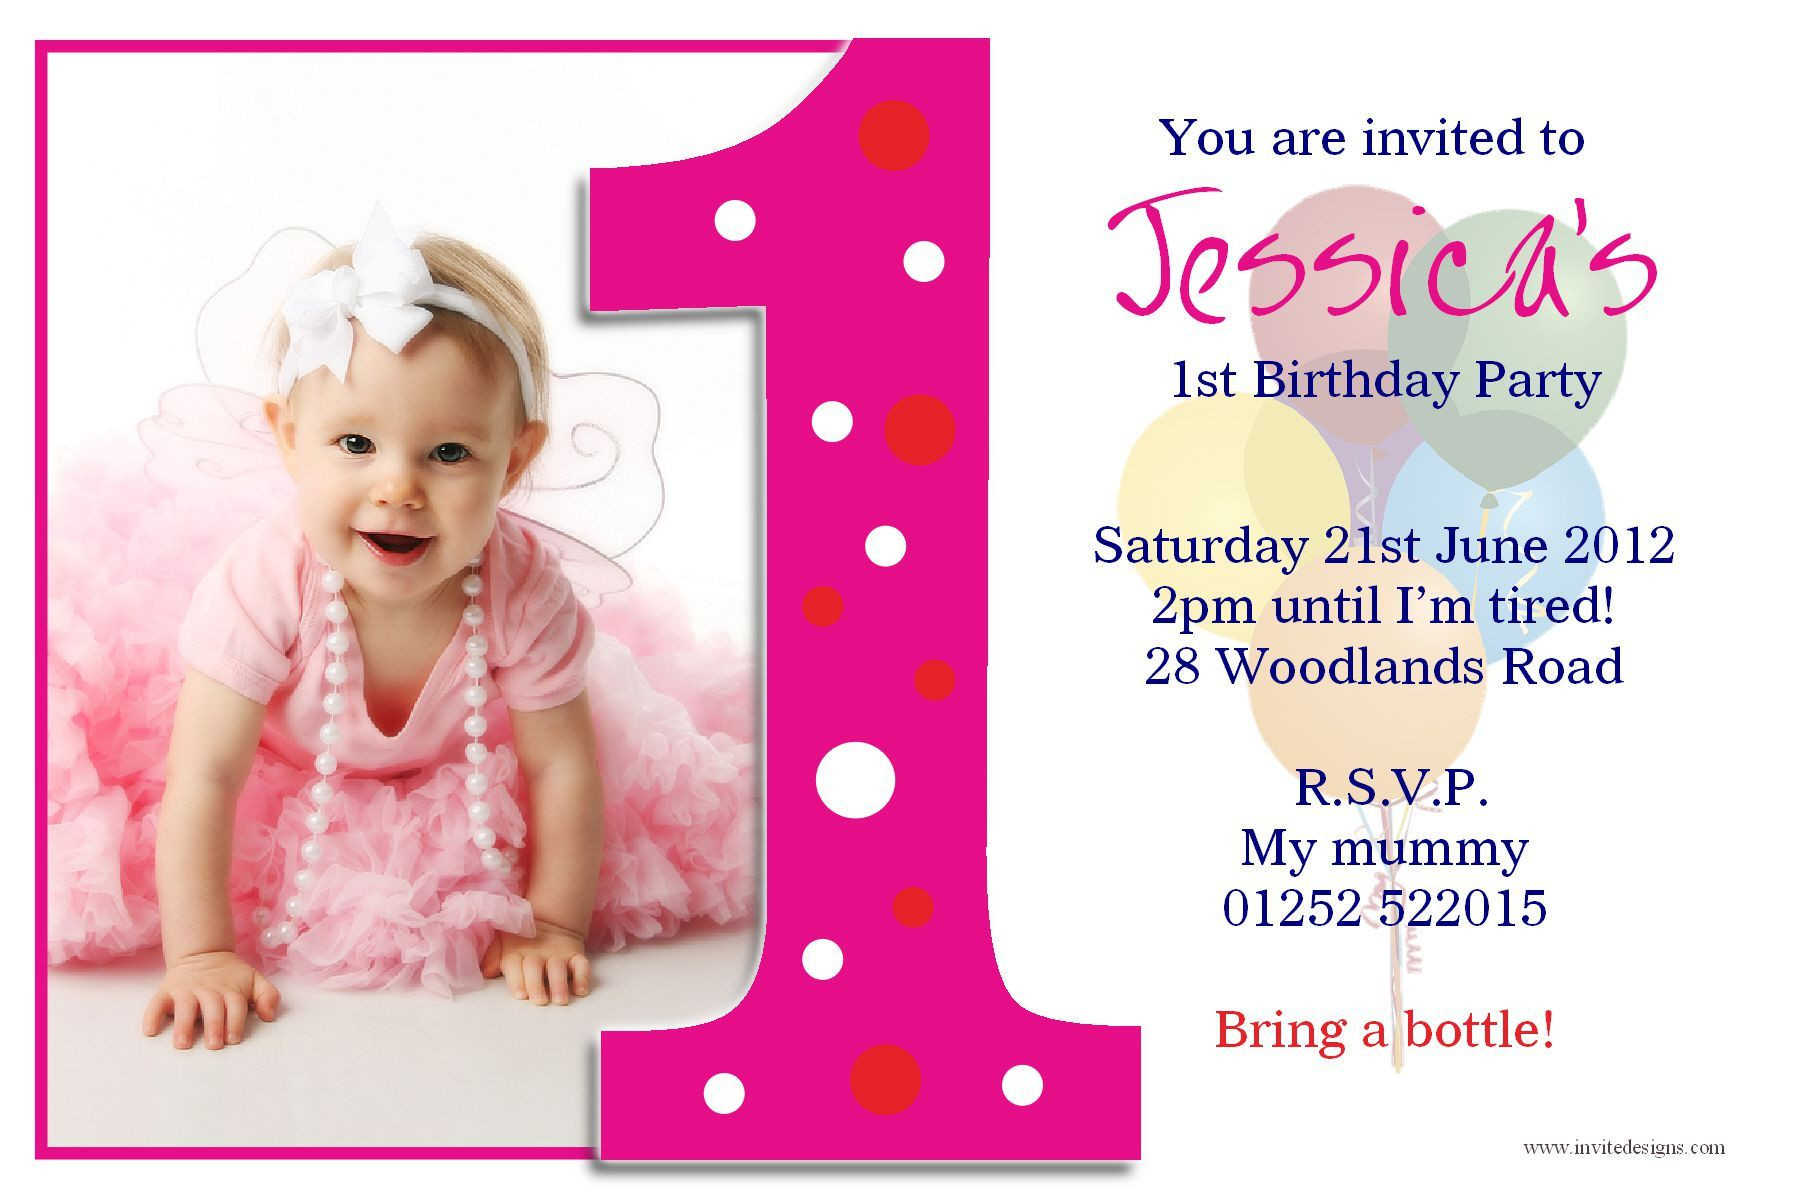 Best ideas about Birthday Invitation Card
. Save or Pin birthday party First birthday invitations Card Now.